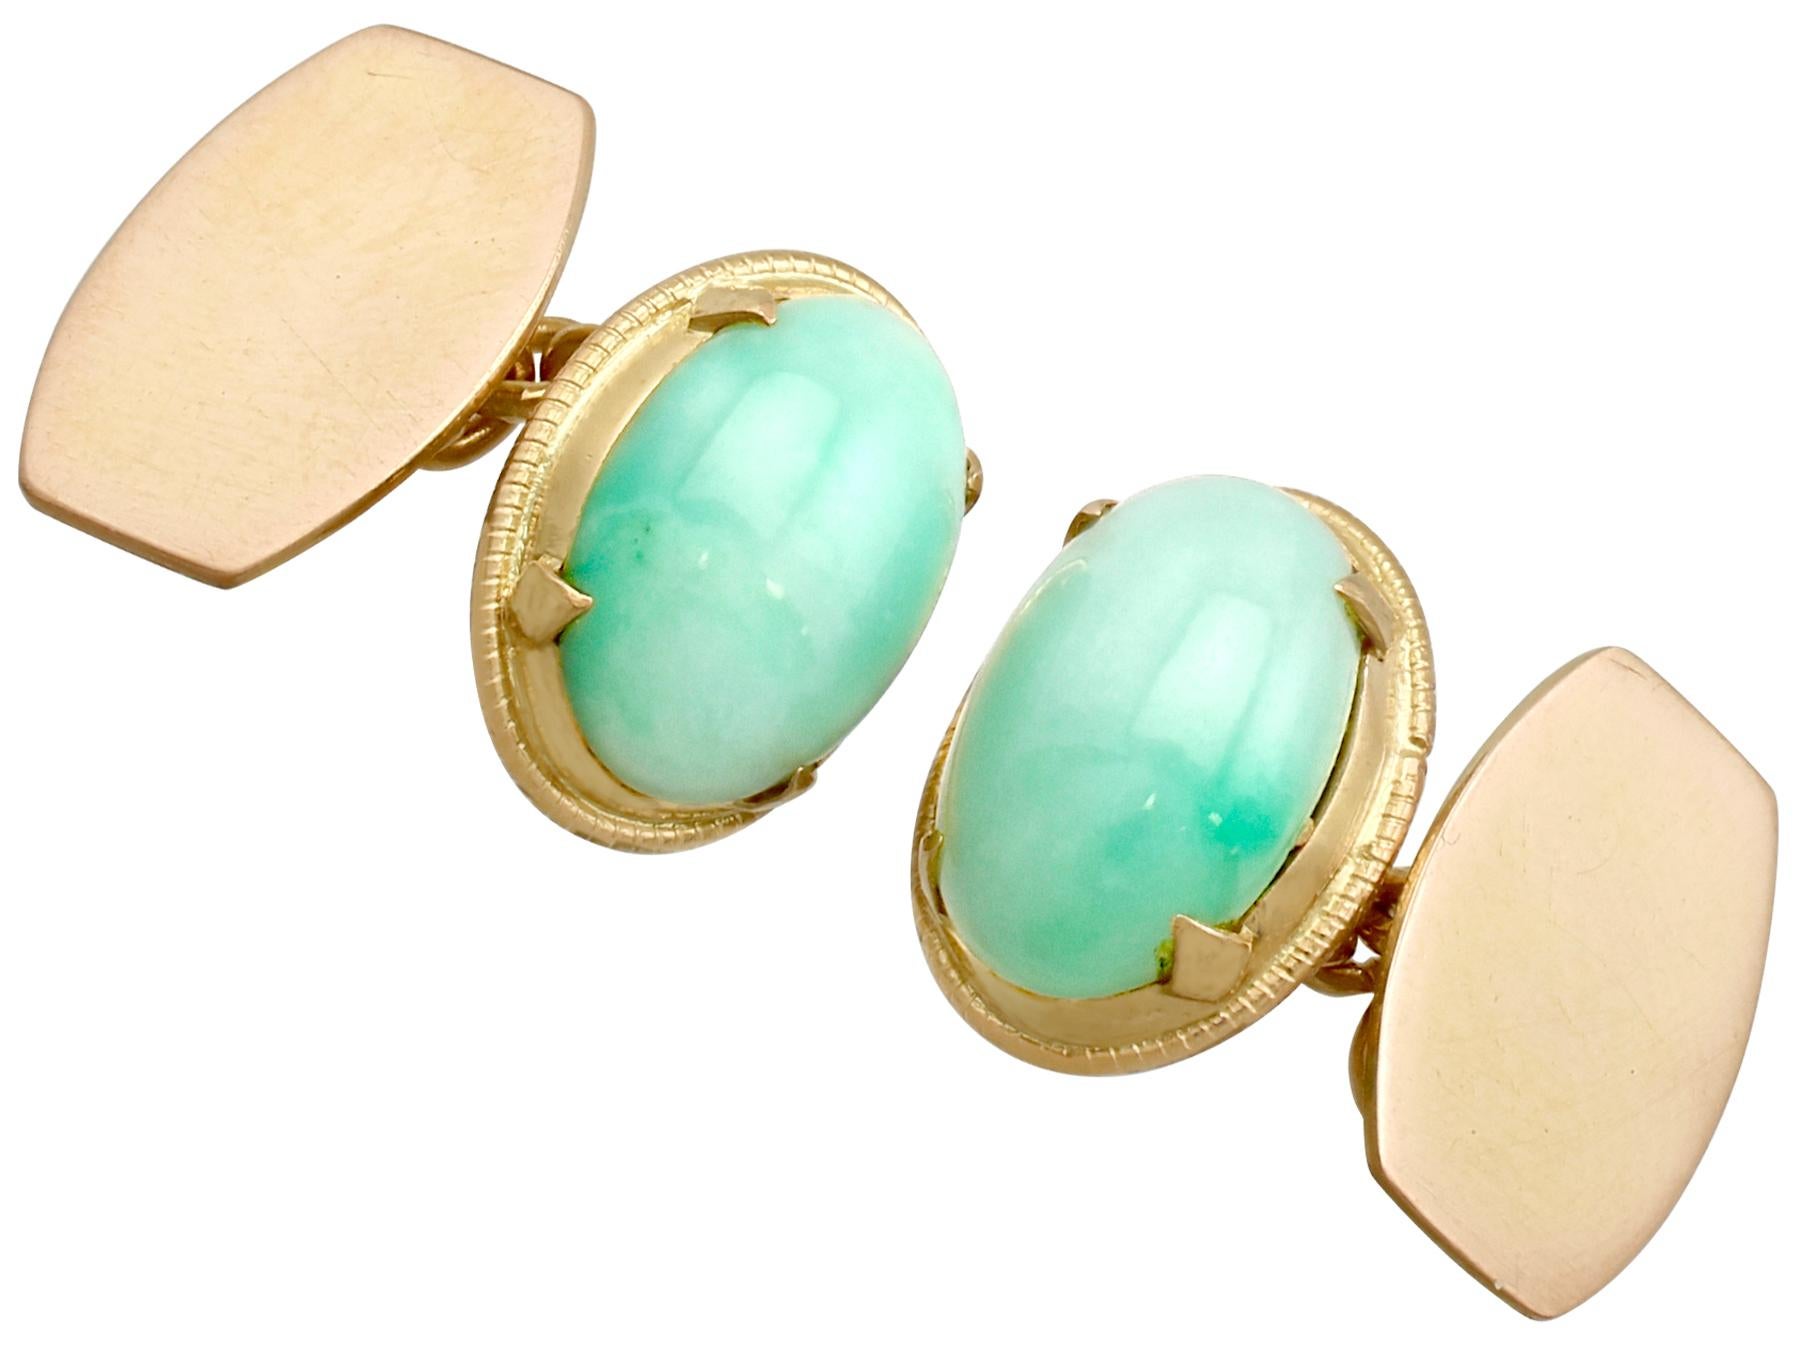 1940s, Cabochon Cut Jade or Natural Jadeite Cufflinks in Yellow Gold In Excellent Condition For Sale In Jesmond, Newcastle Upon Tyne